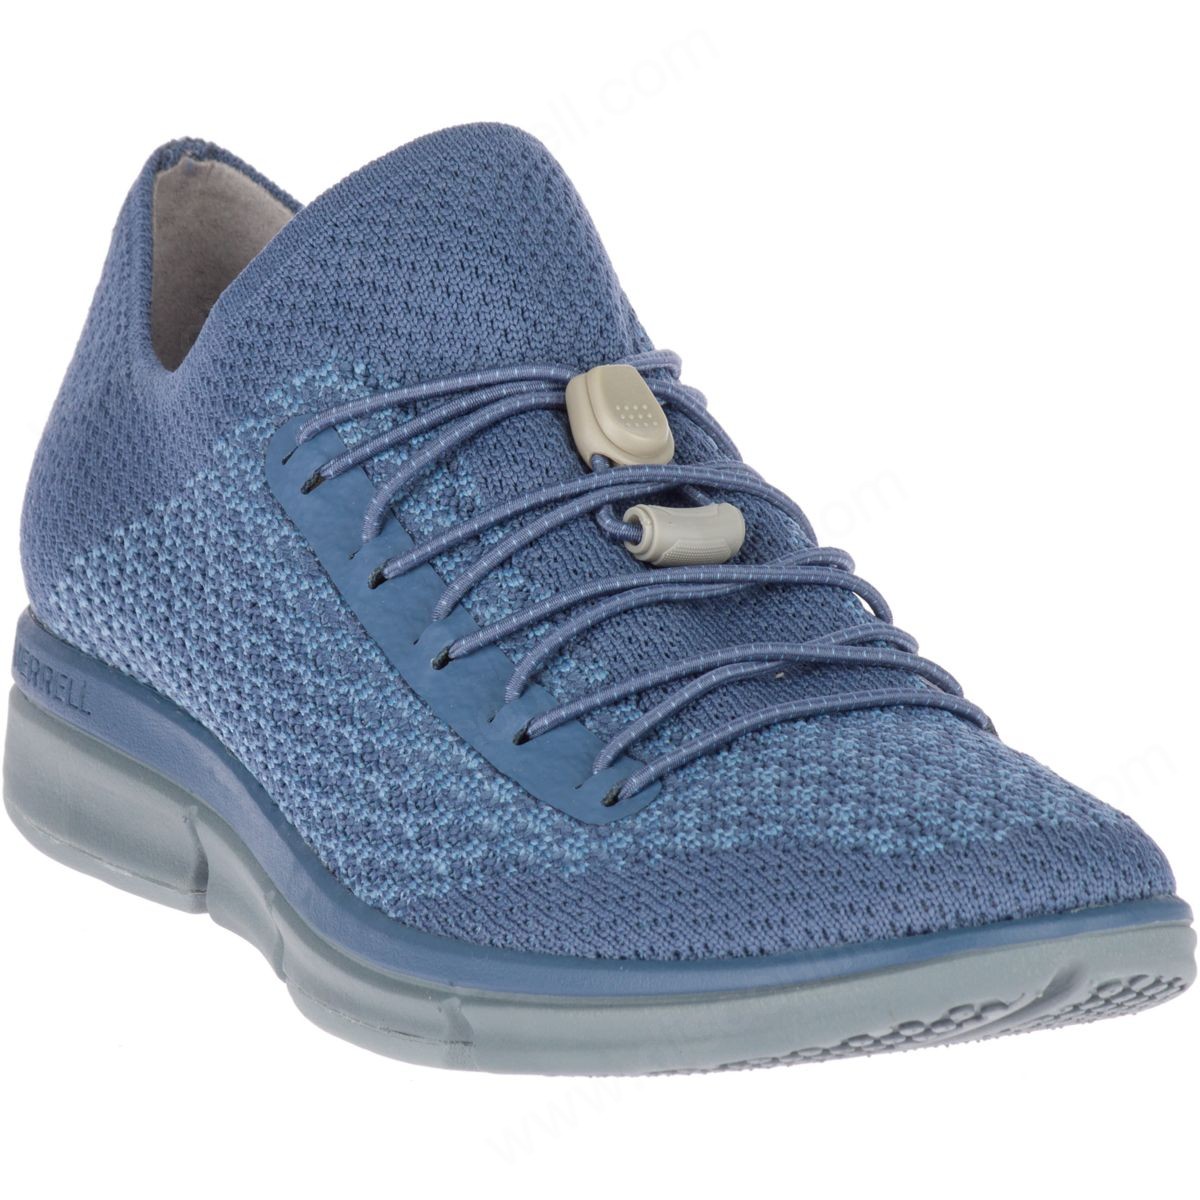 Merrell Womens's Zoe Sojourn Lace Knit Q2 Bering Sea - -3